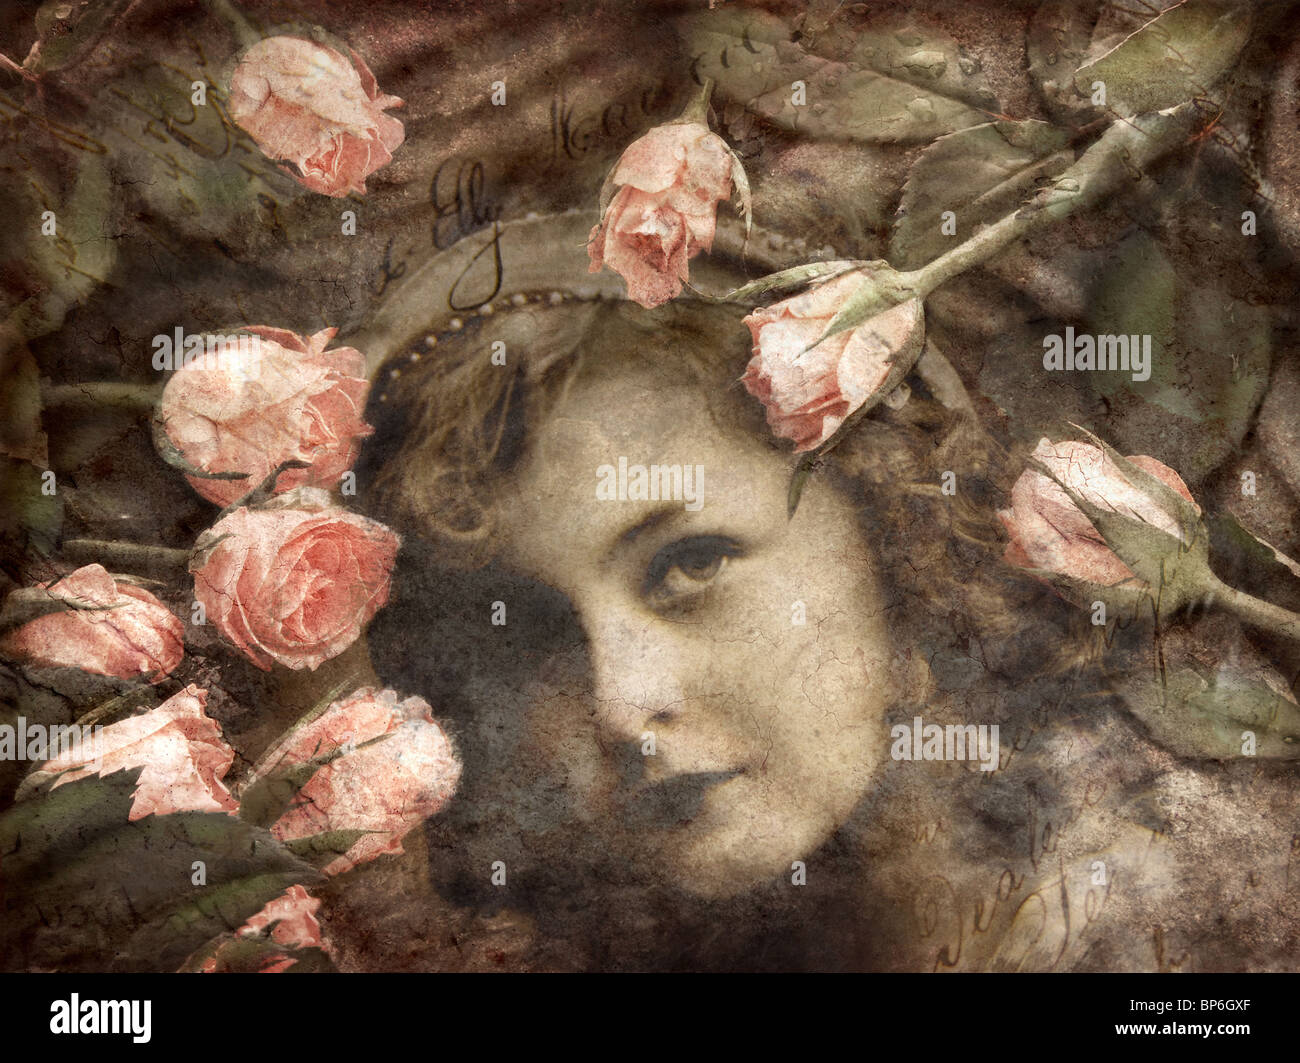 Grungy image of girl and roses Stock Photo